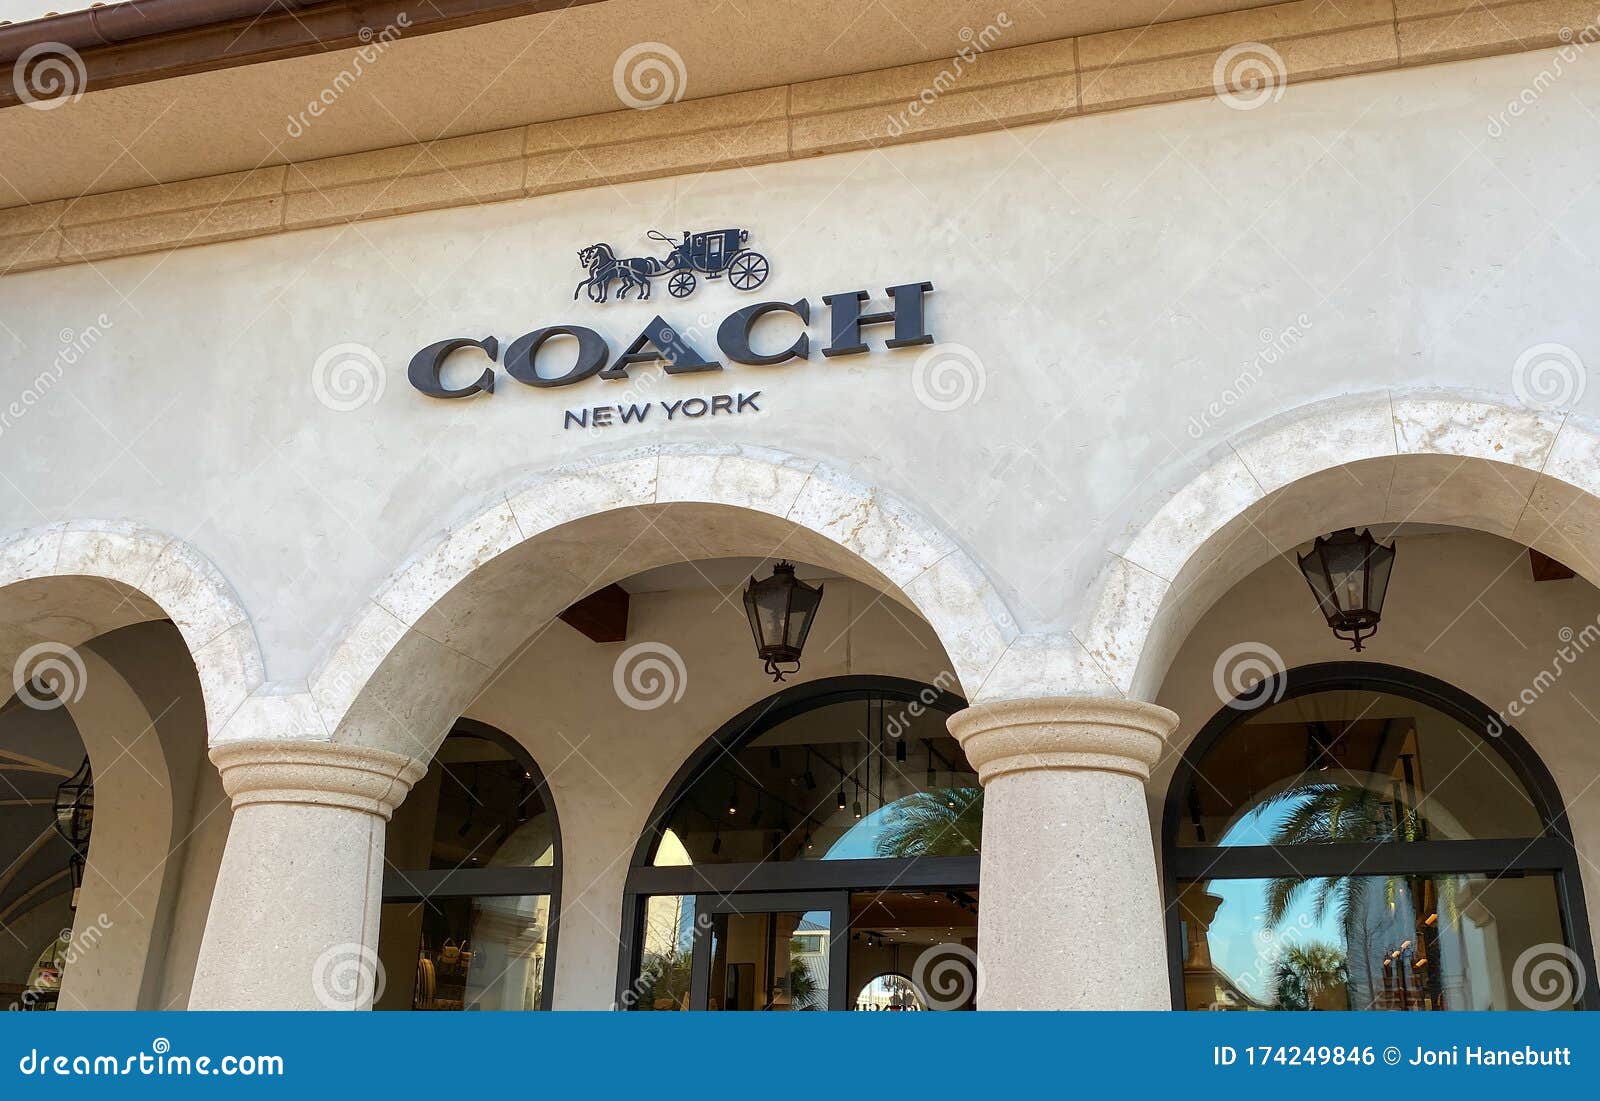 Coach Outlet new arrivals: Clothing, bags, accessories, more at epic prices  | Aug. 10, 2023 - cleveland.com